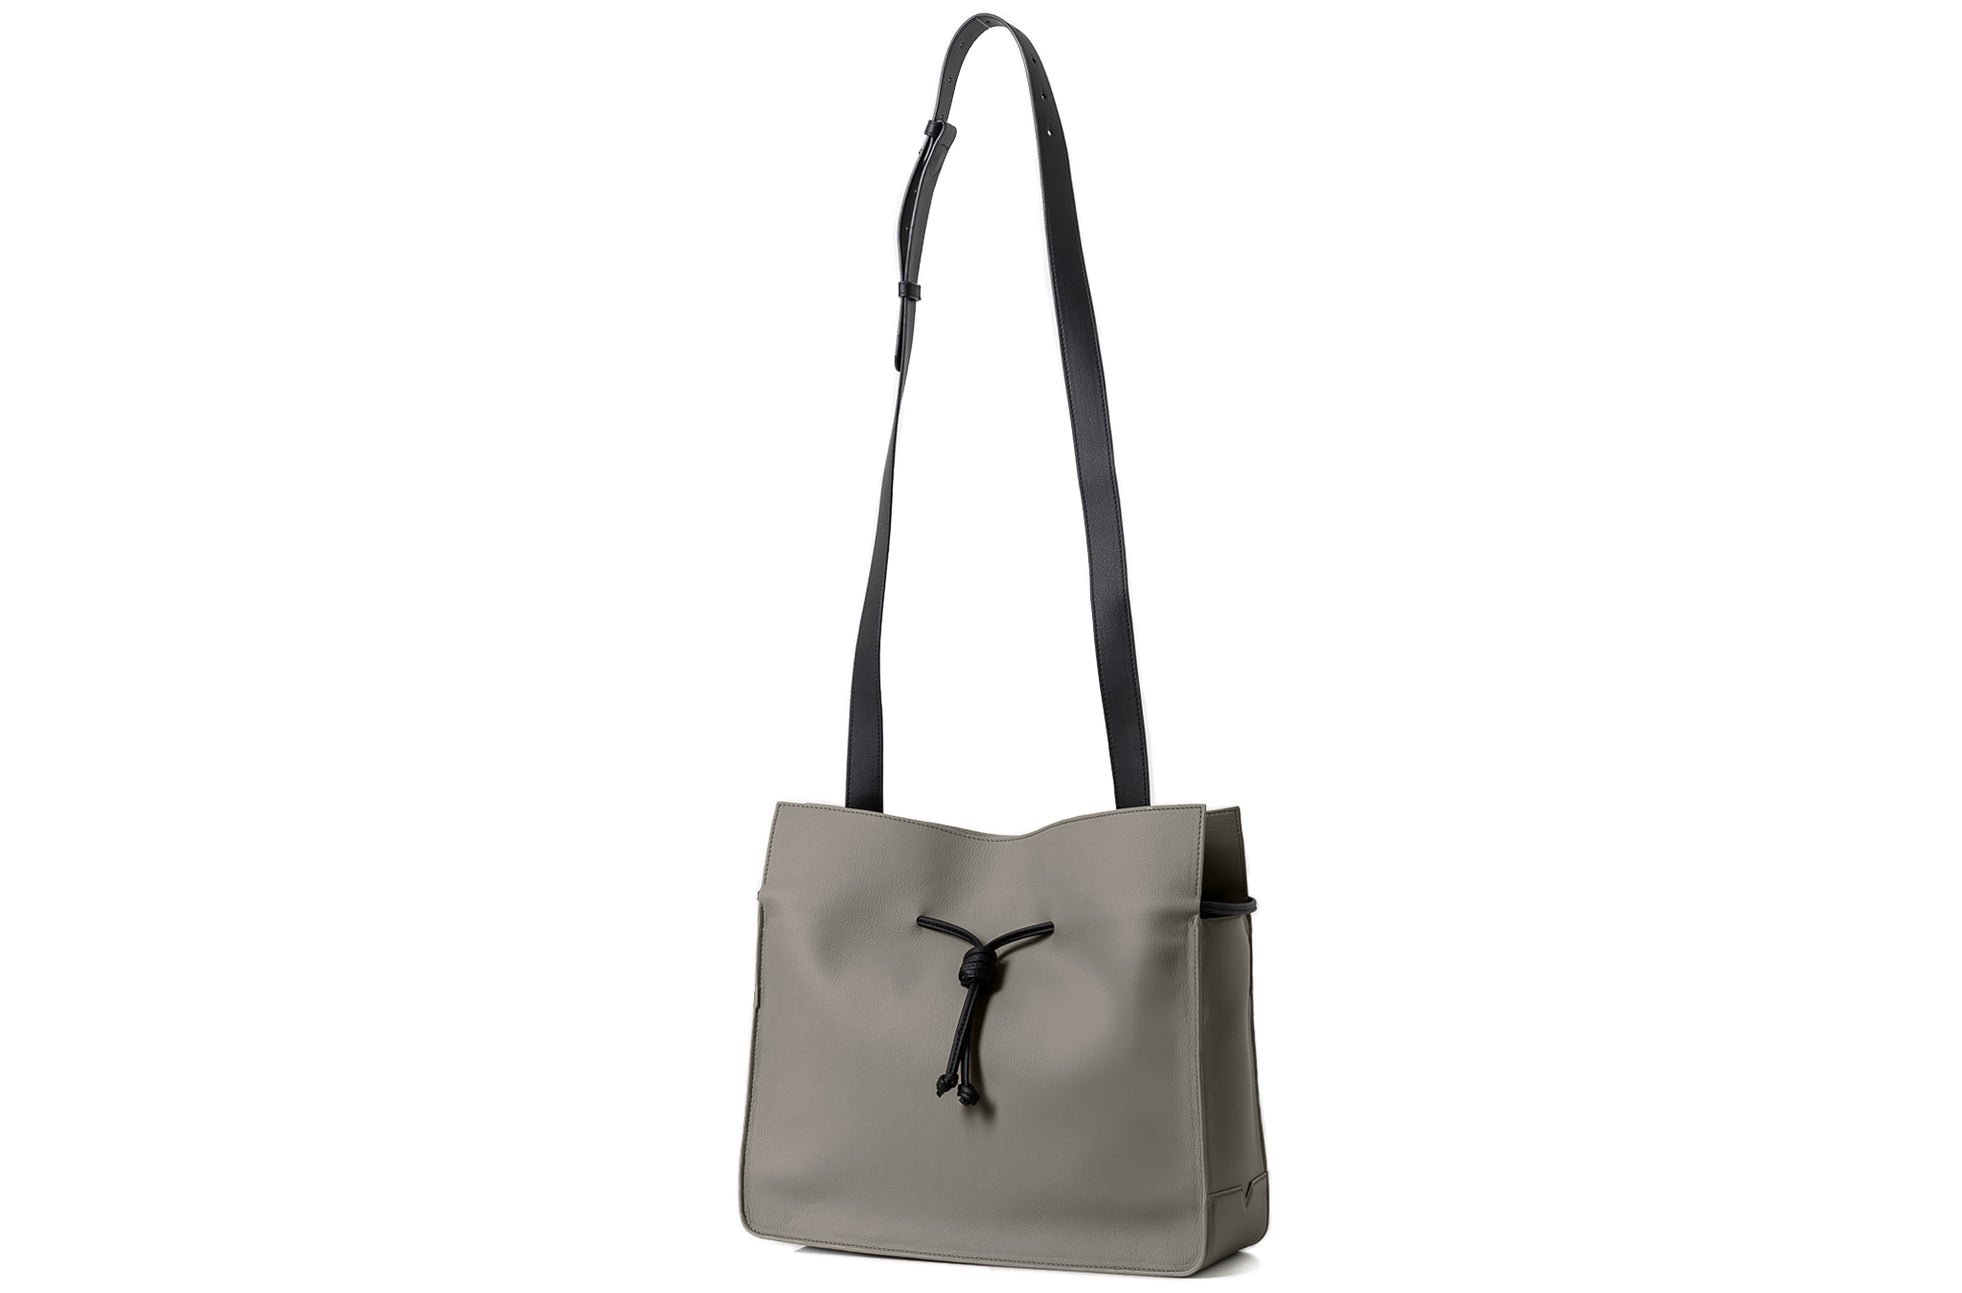 The Medium Shopper in Technik-Leather in Stone and Black image 13